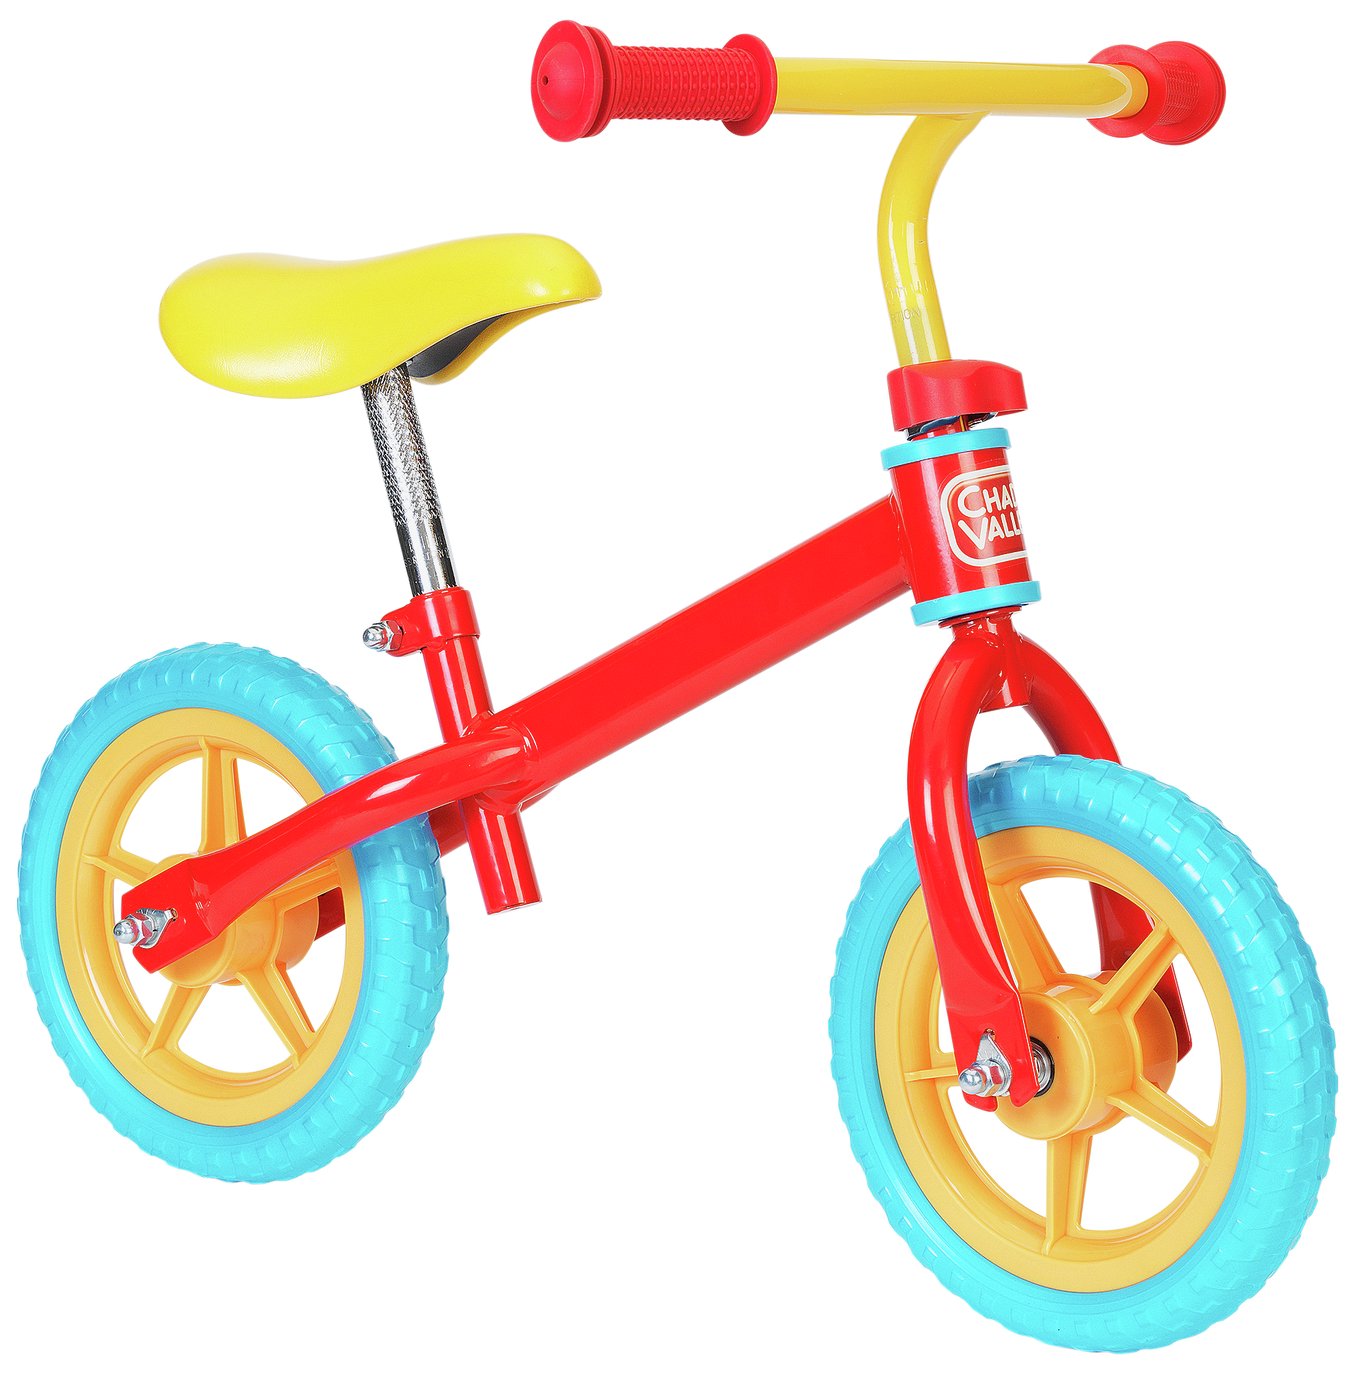 Buy Chad Valley 10 inch Wheel Size Kids 